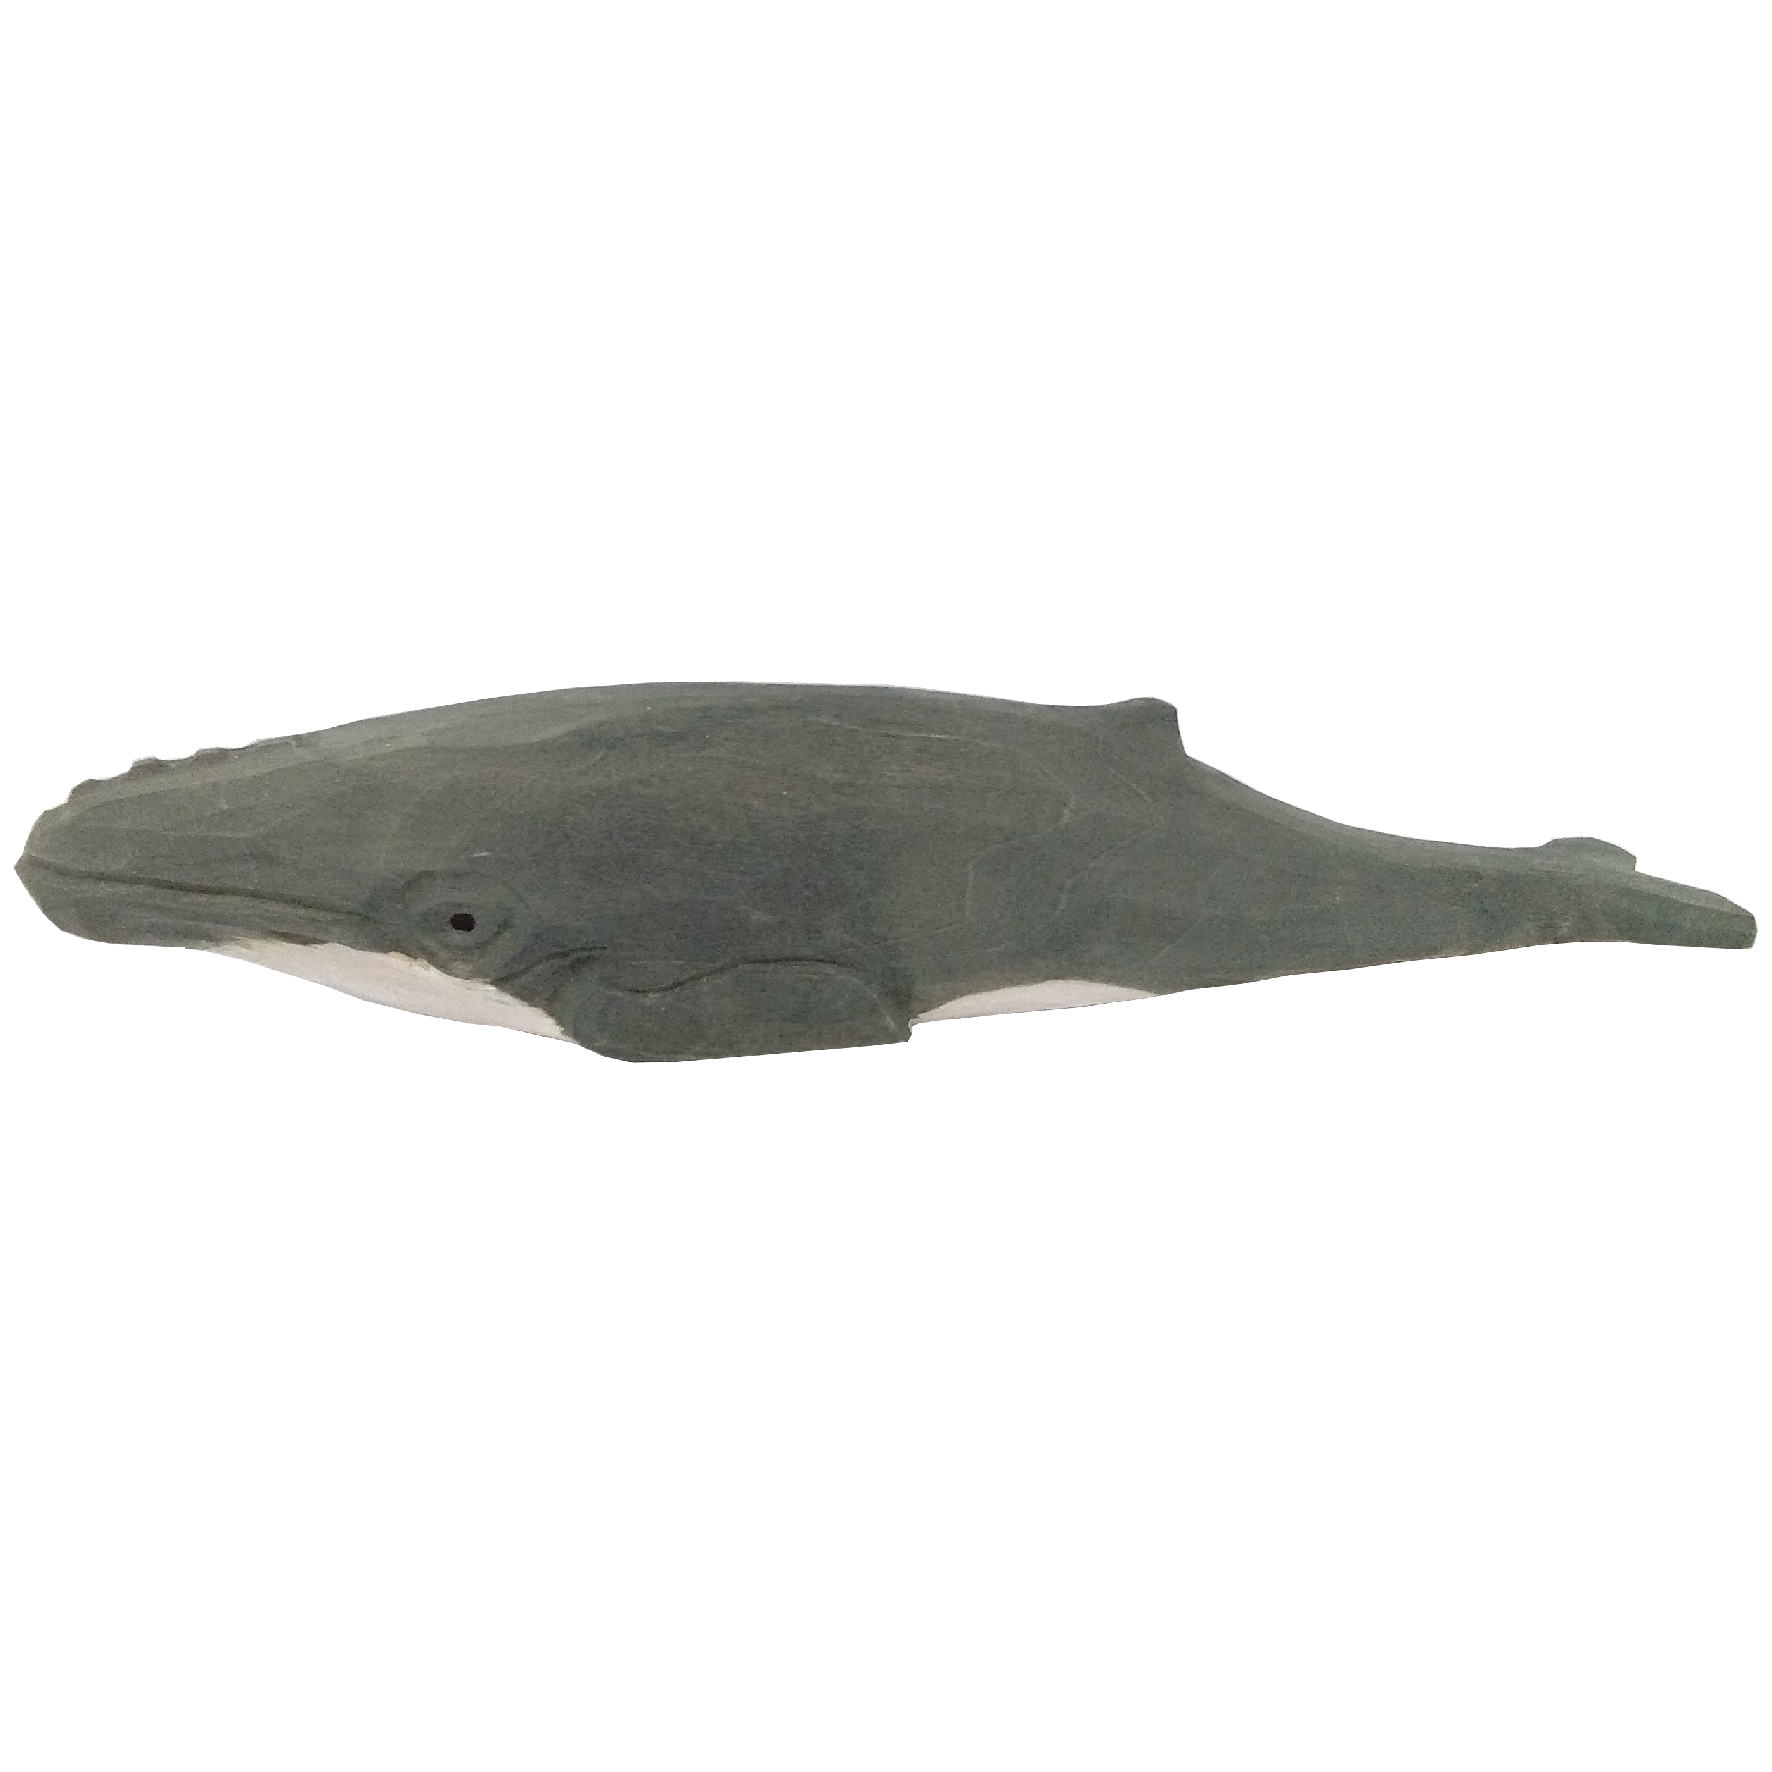 Wudimals® Wooden Humpback Whale Animal Toy - Holt and Ivy